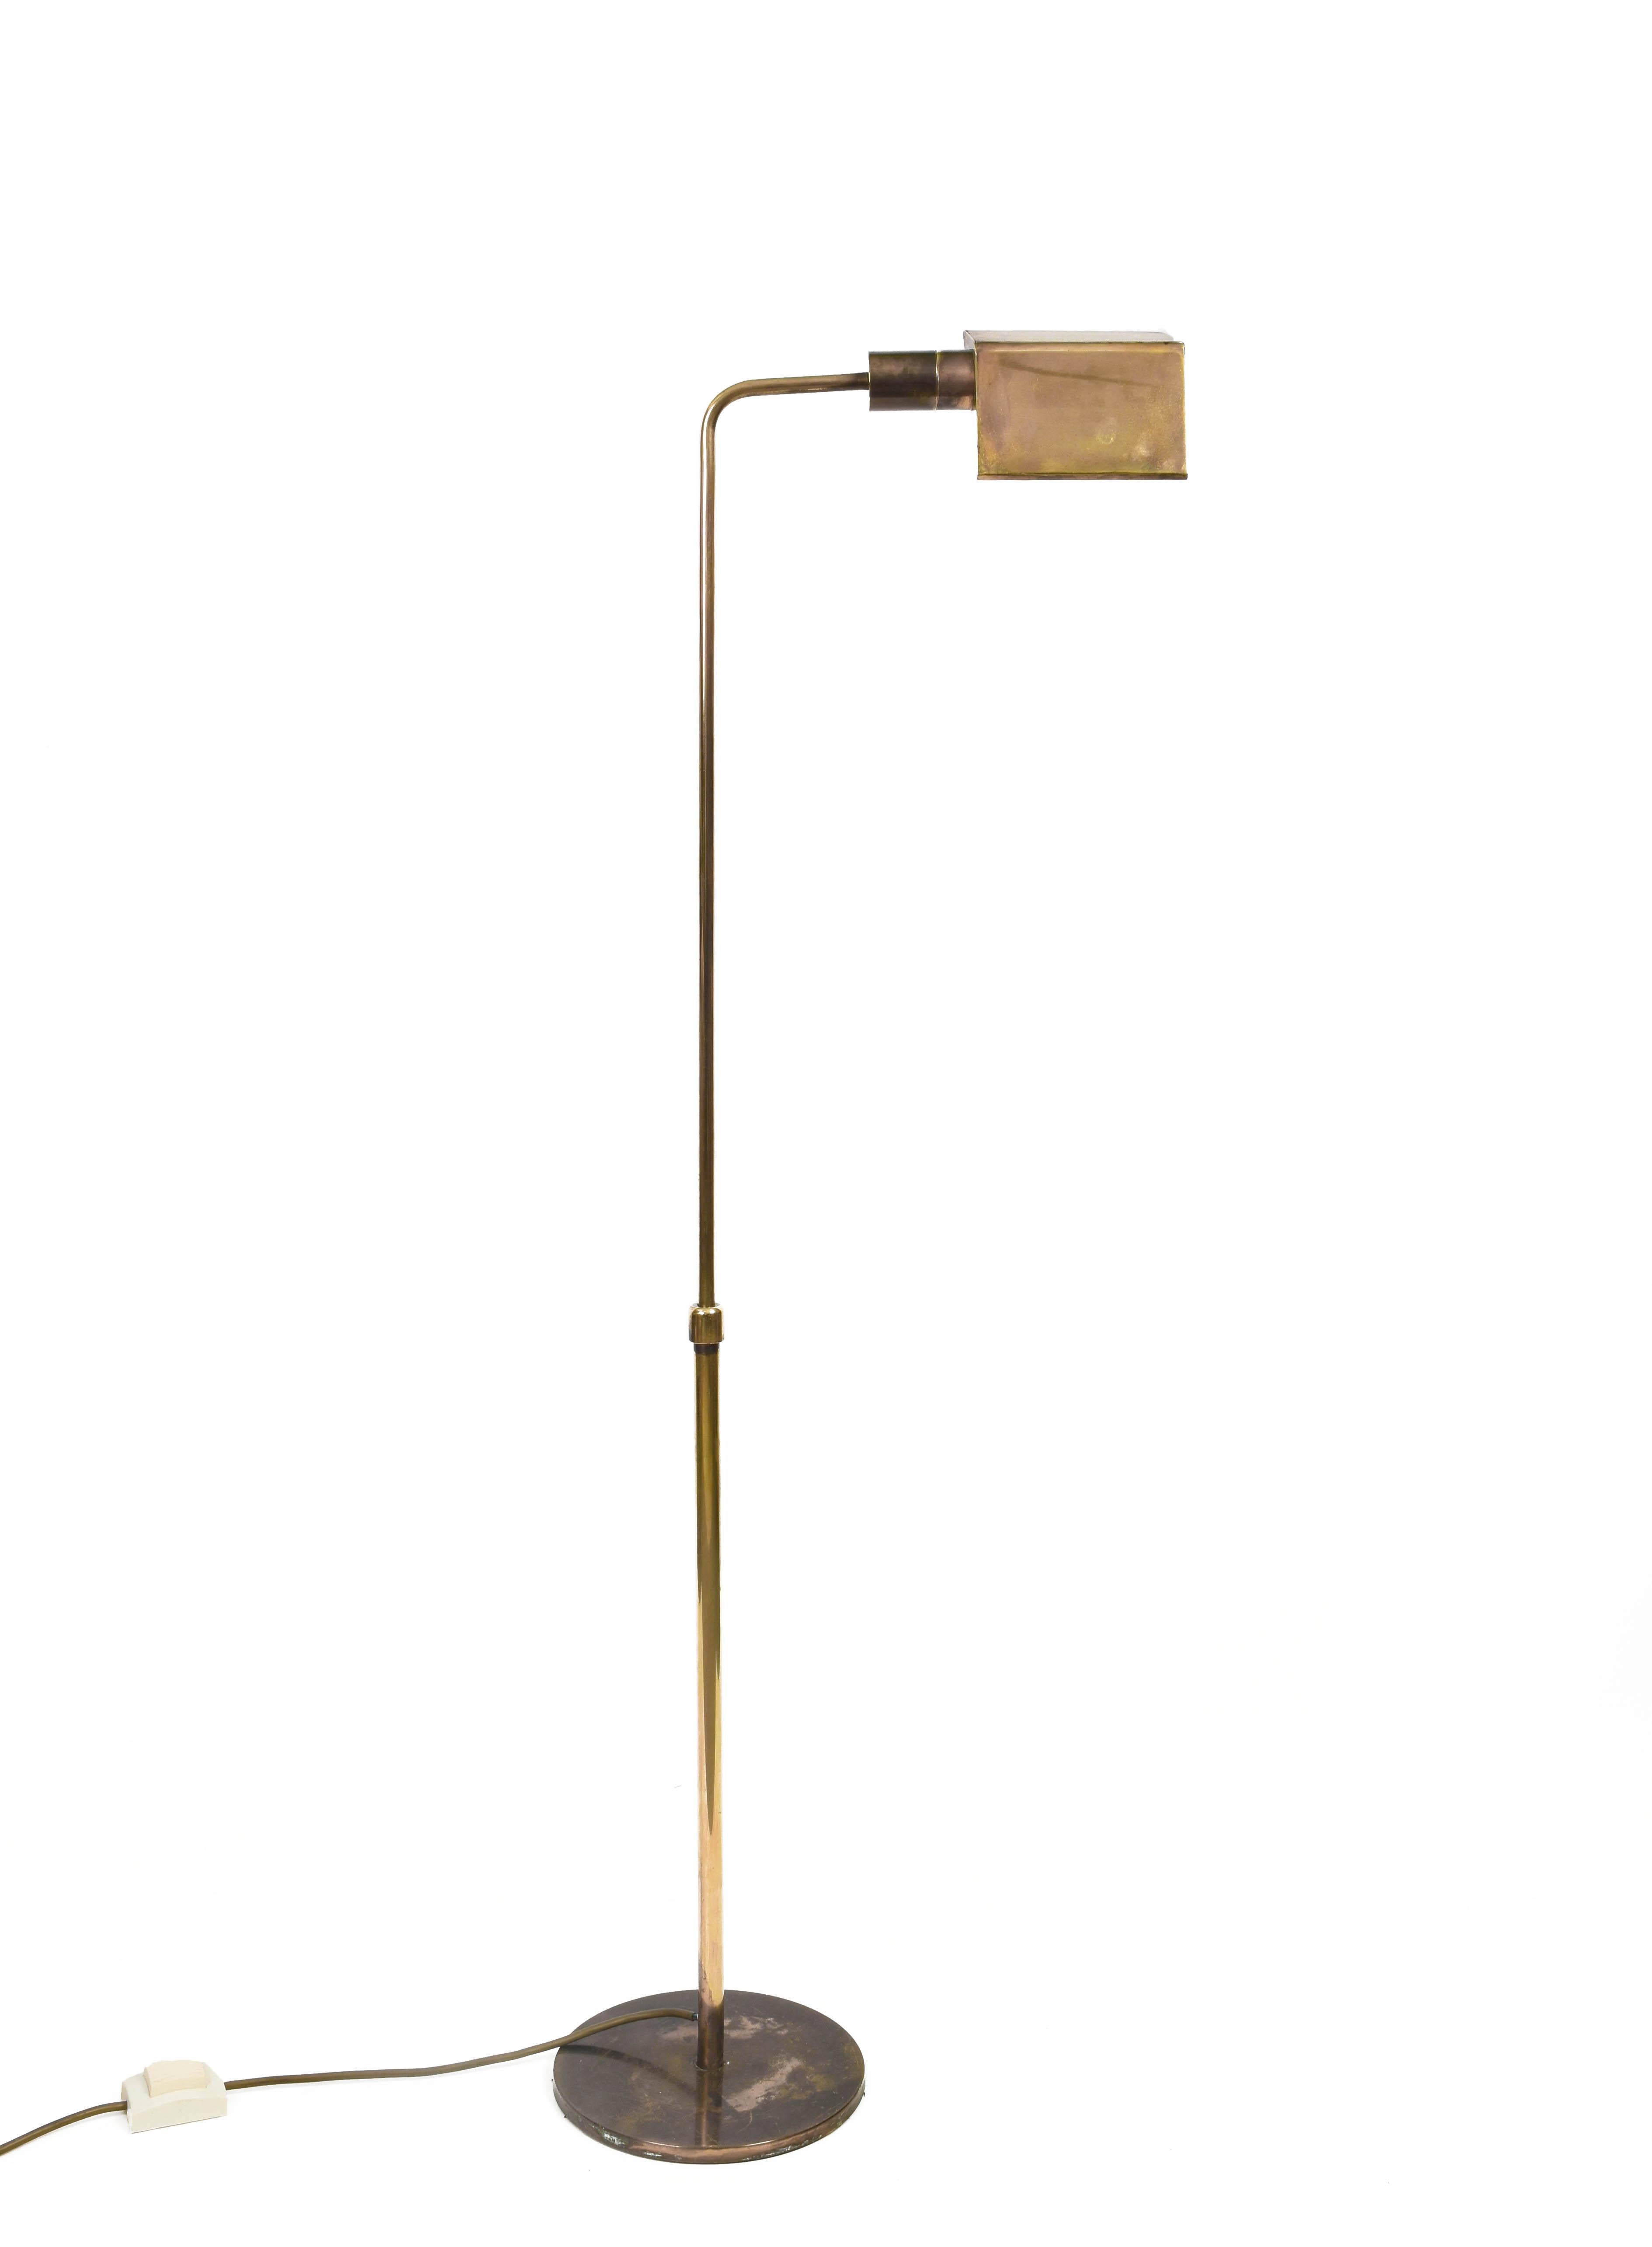 Classic Mid-Century Modern and elegant floor lamp in polished brass. This piece was produced in Italy during 1960s. 

This item is fantastic as it is adjustable in height along the body and the cap is fully adjustable vertically, rotating for an